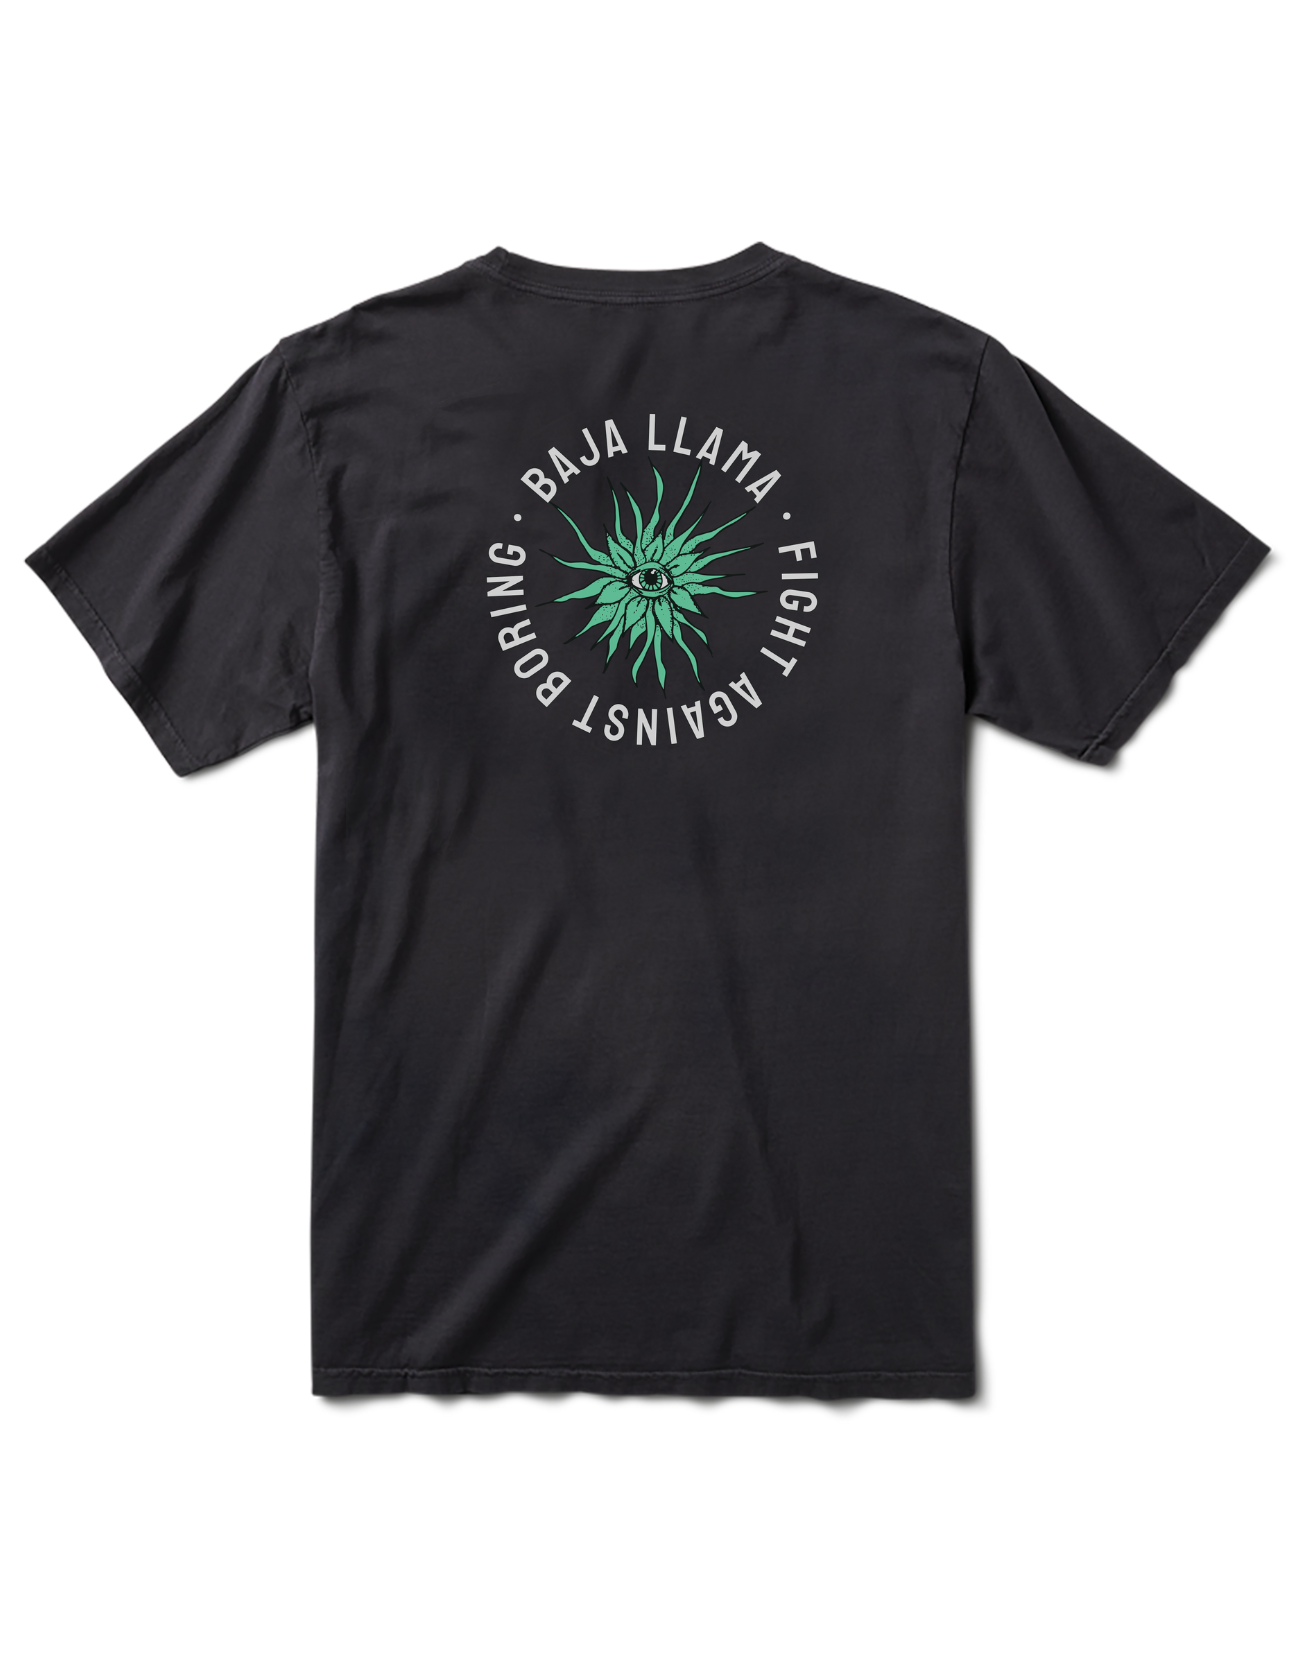 EYE SEE A SUCCULENT - PRIMO GRAPHIC TEE by Bajallama